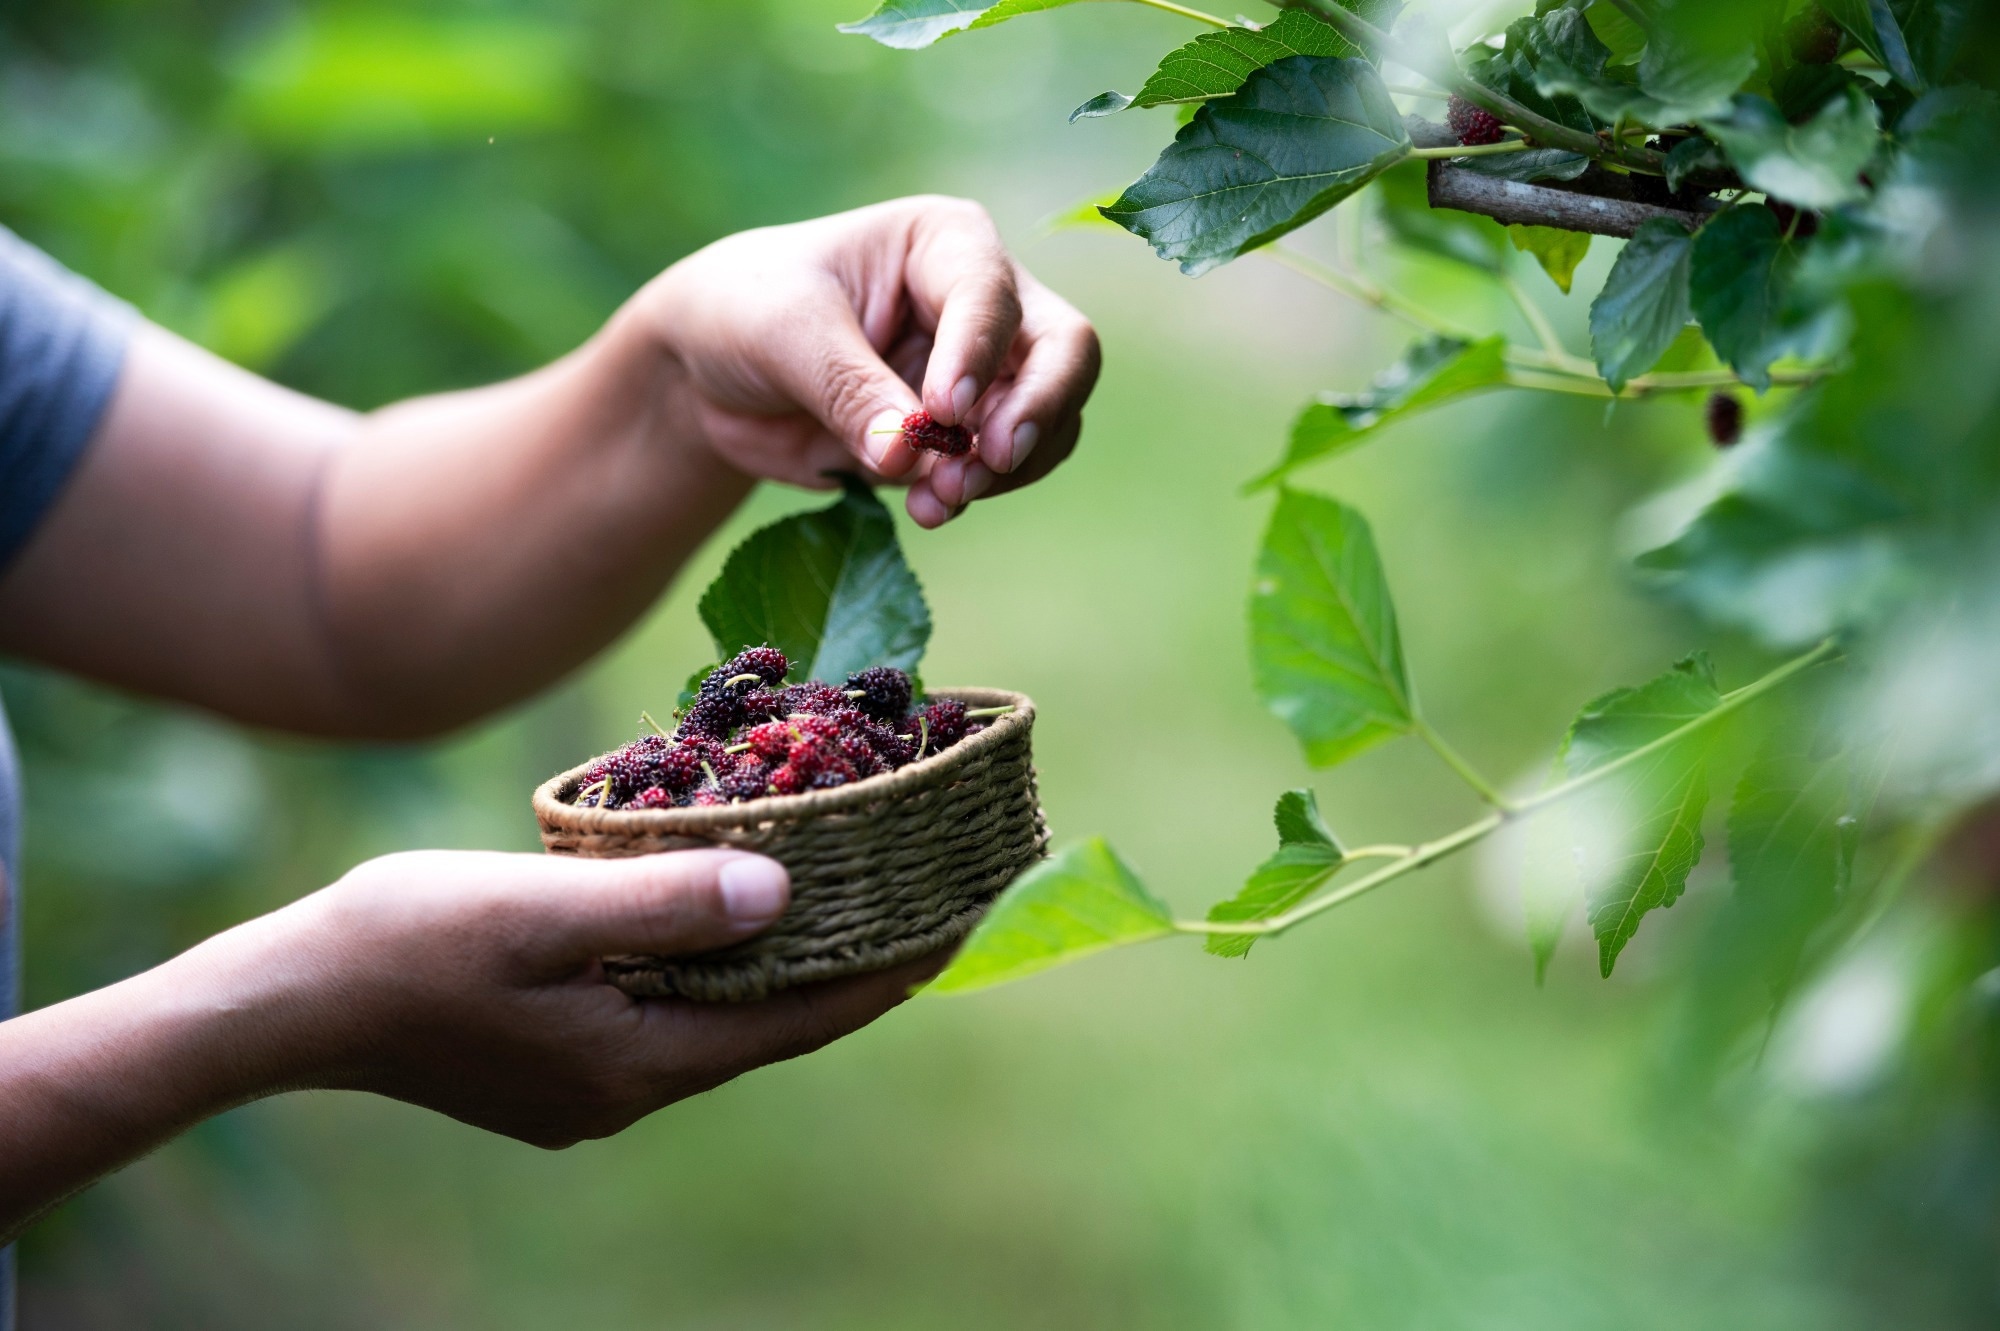 Study: Mulberry Component Kuwanon C Exerts Potent Therapeutic Efficacy In Vitro against COVID-19 by Blocking the SARS-CoV-2 Spike S1 RBD:ACE2 Receptor Interaction. Image Credit: Somchai_Stock/Shutterstock